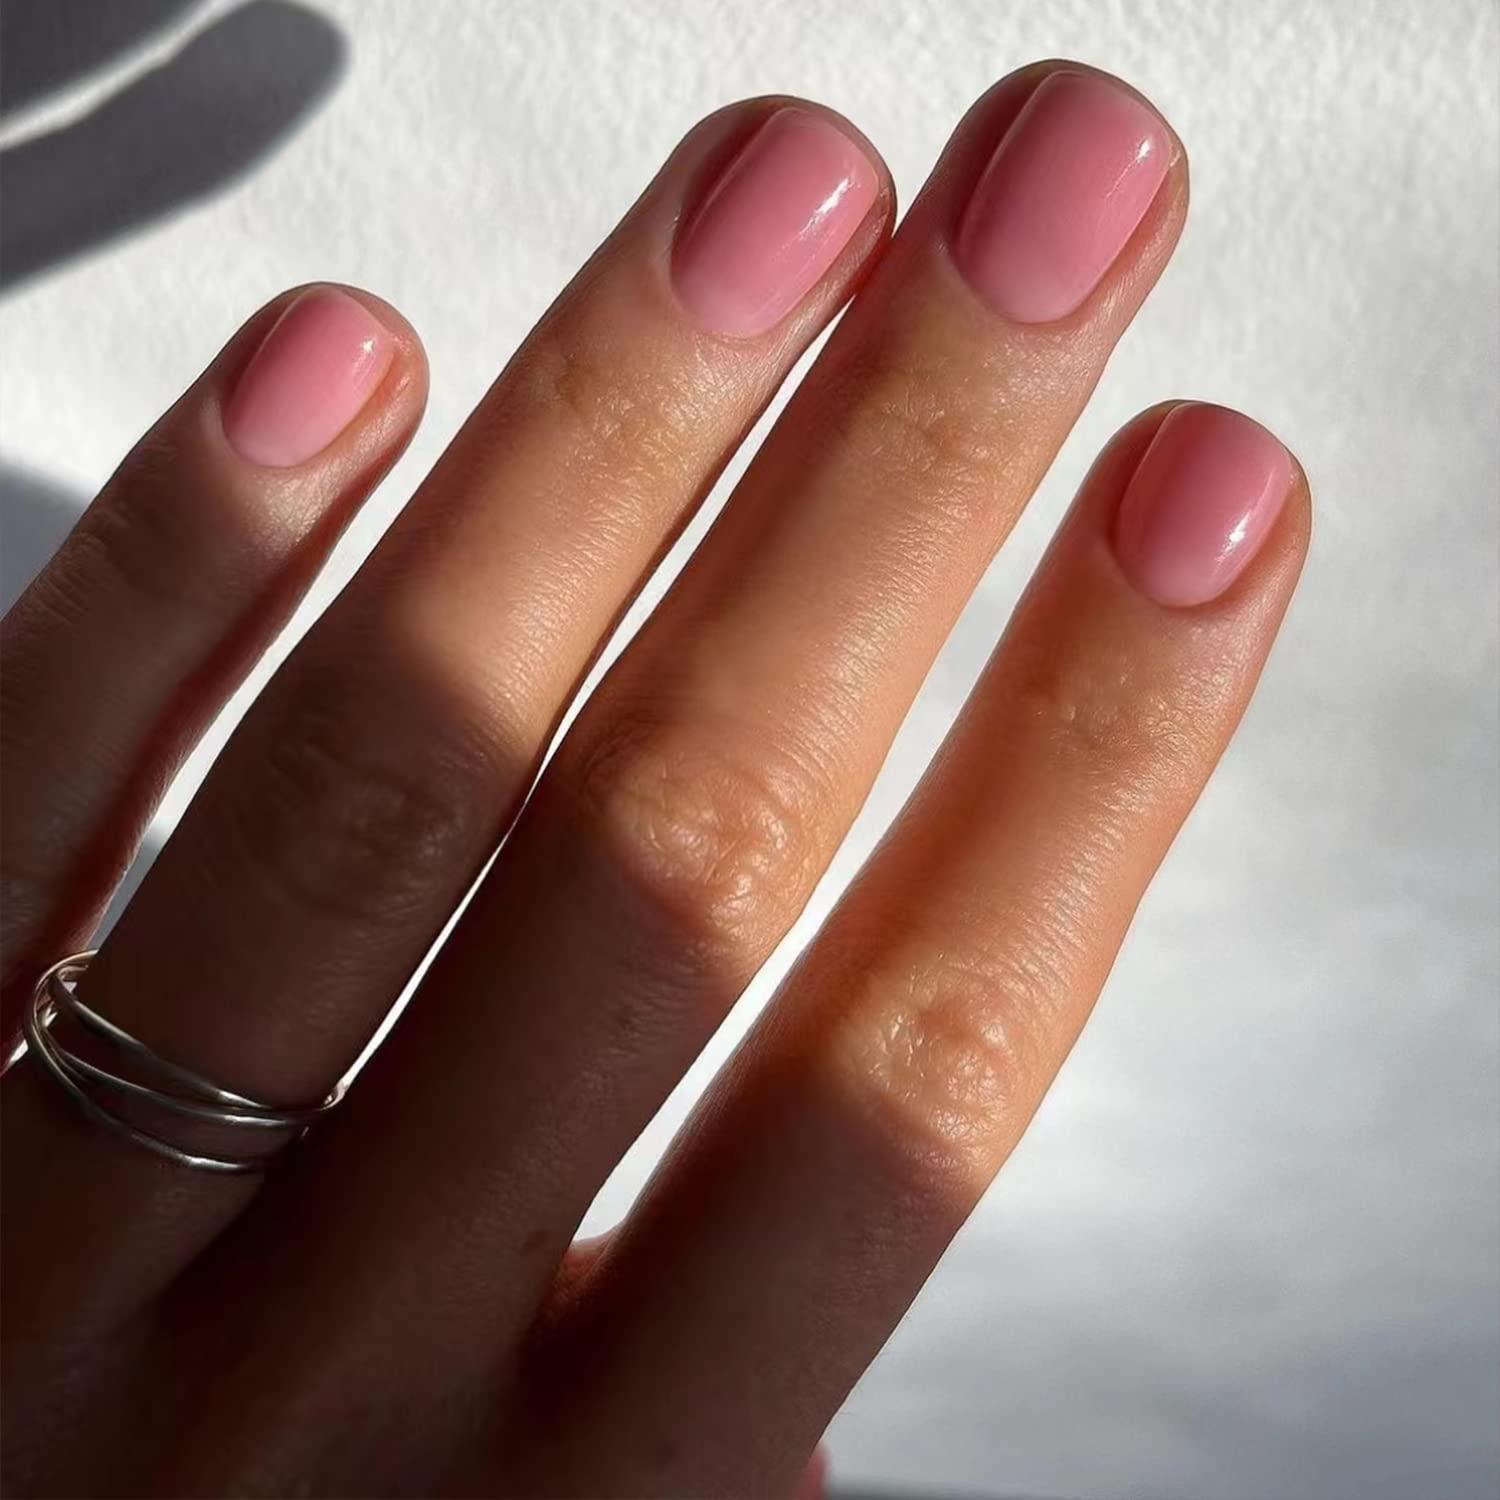 10 Short Nail Art Ideas That Don't Require Extensions